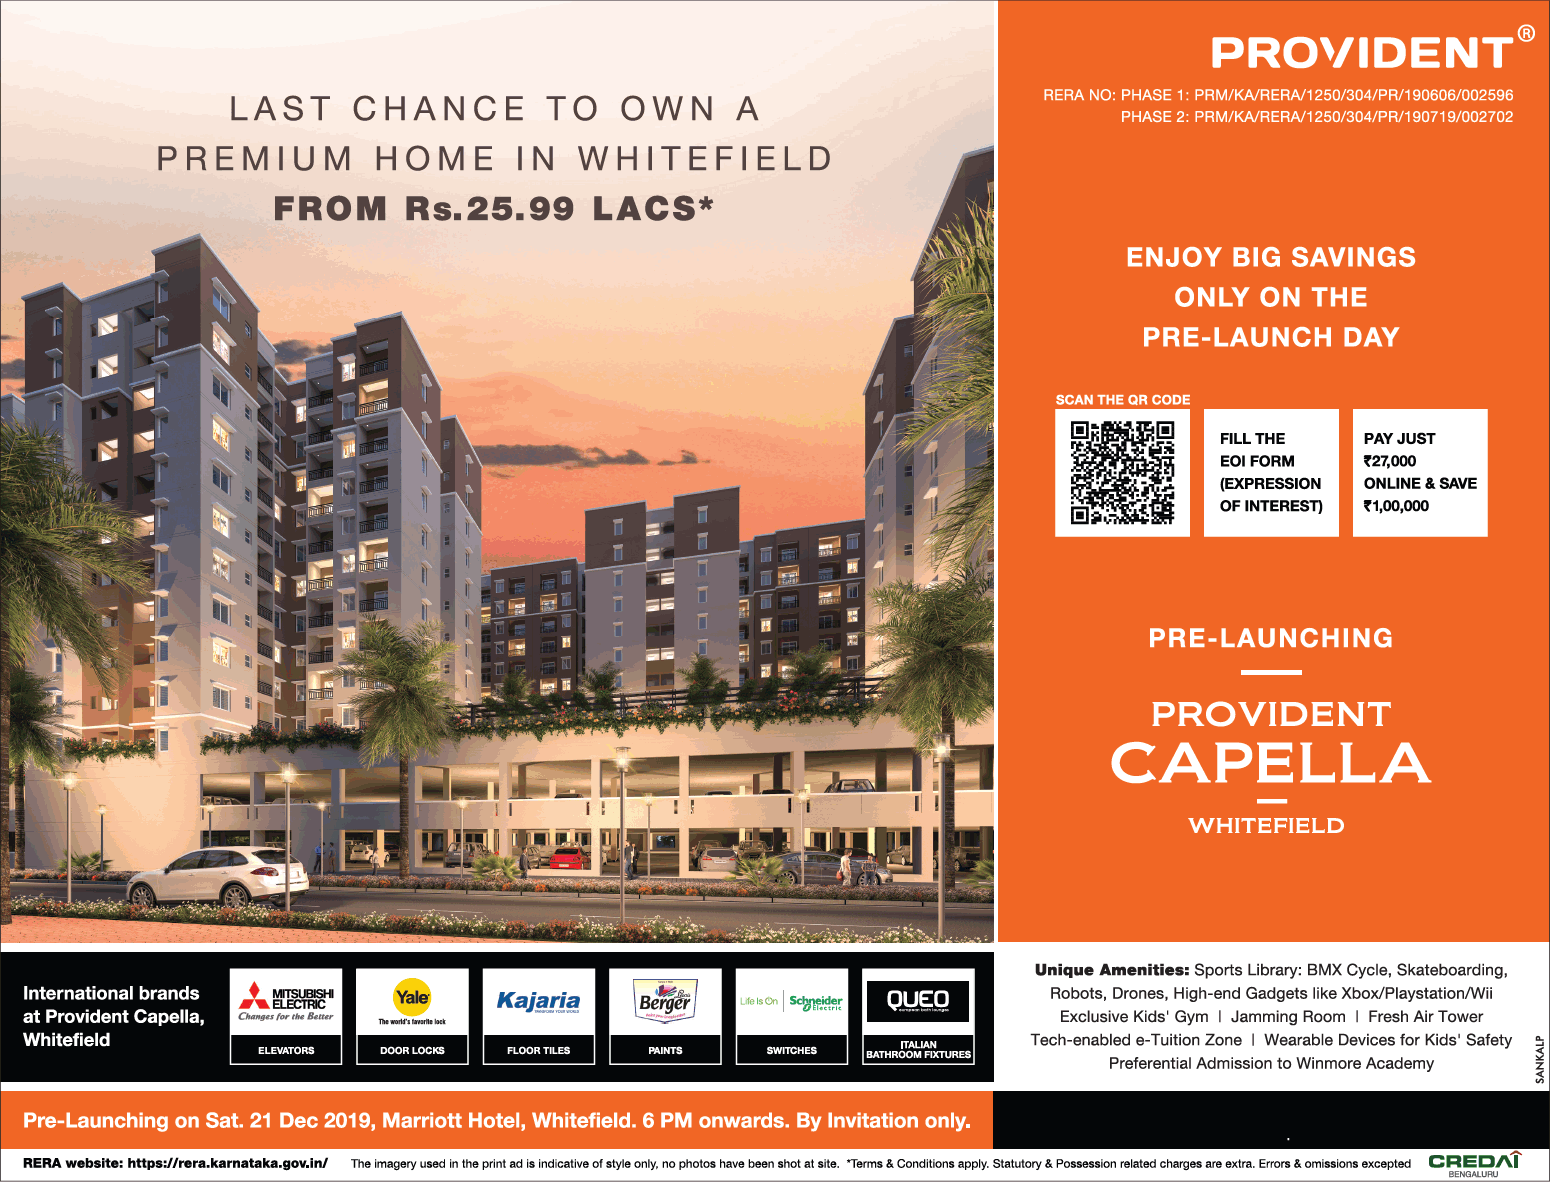 Enjoy big savings only on the pre-launch day at  Provident Capella in Whitefield, Bangalore Update